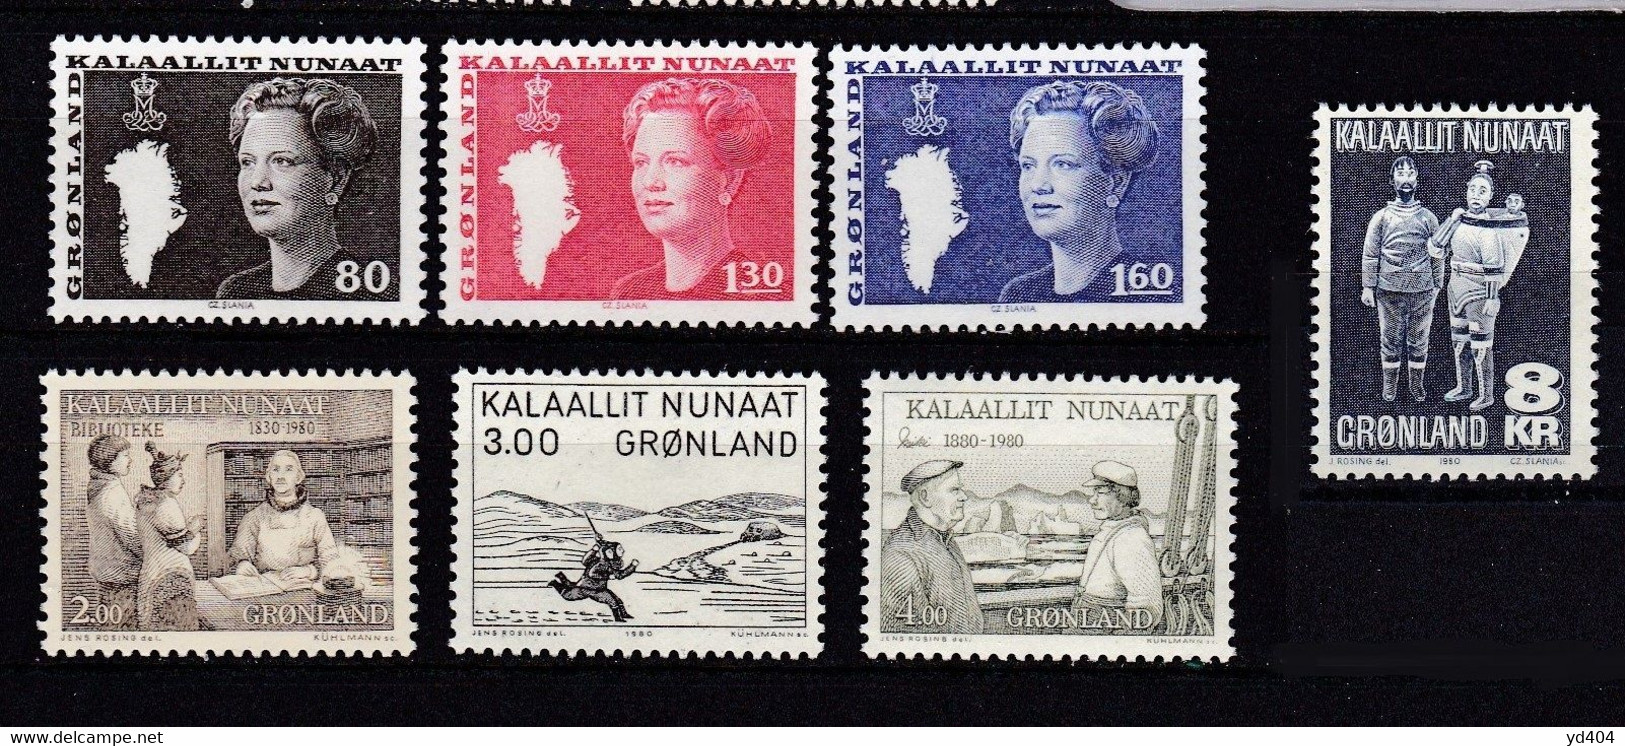 GL133 - GREENLAND – 1980 – FULL YEAR SET – Y&T # 107/13 MNH 9,85 € - Annate Complete